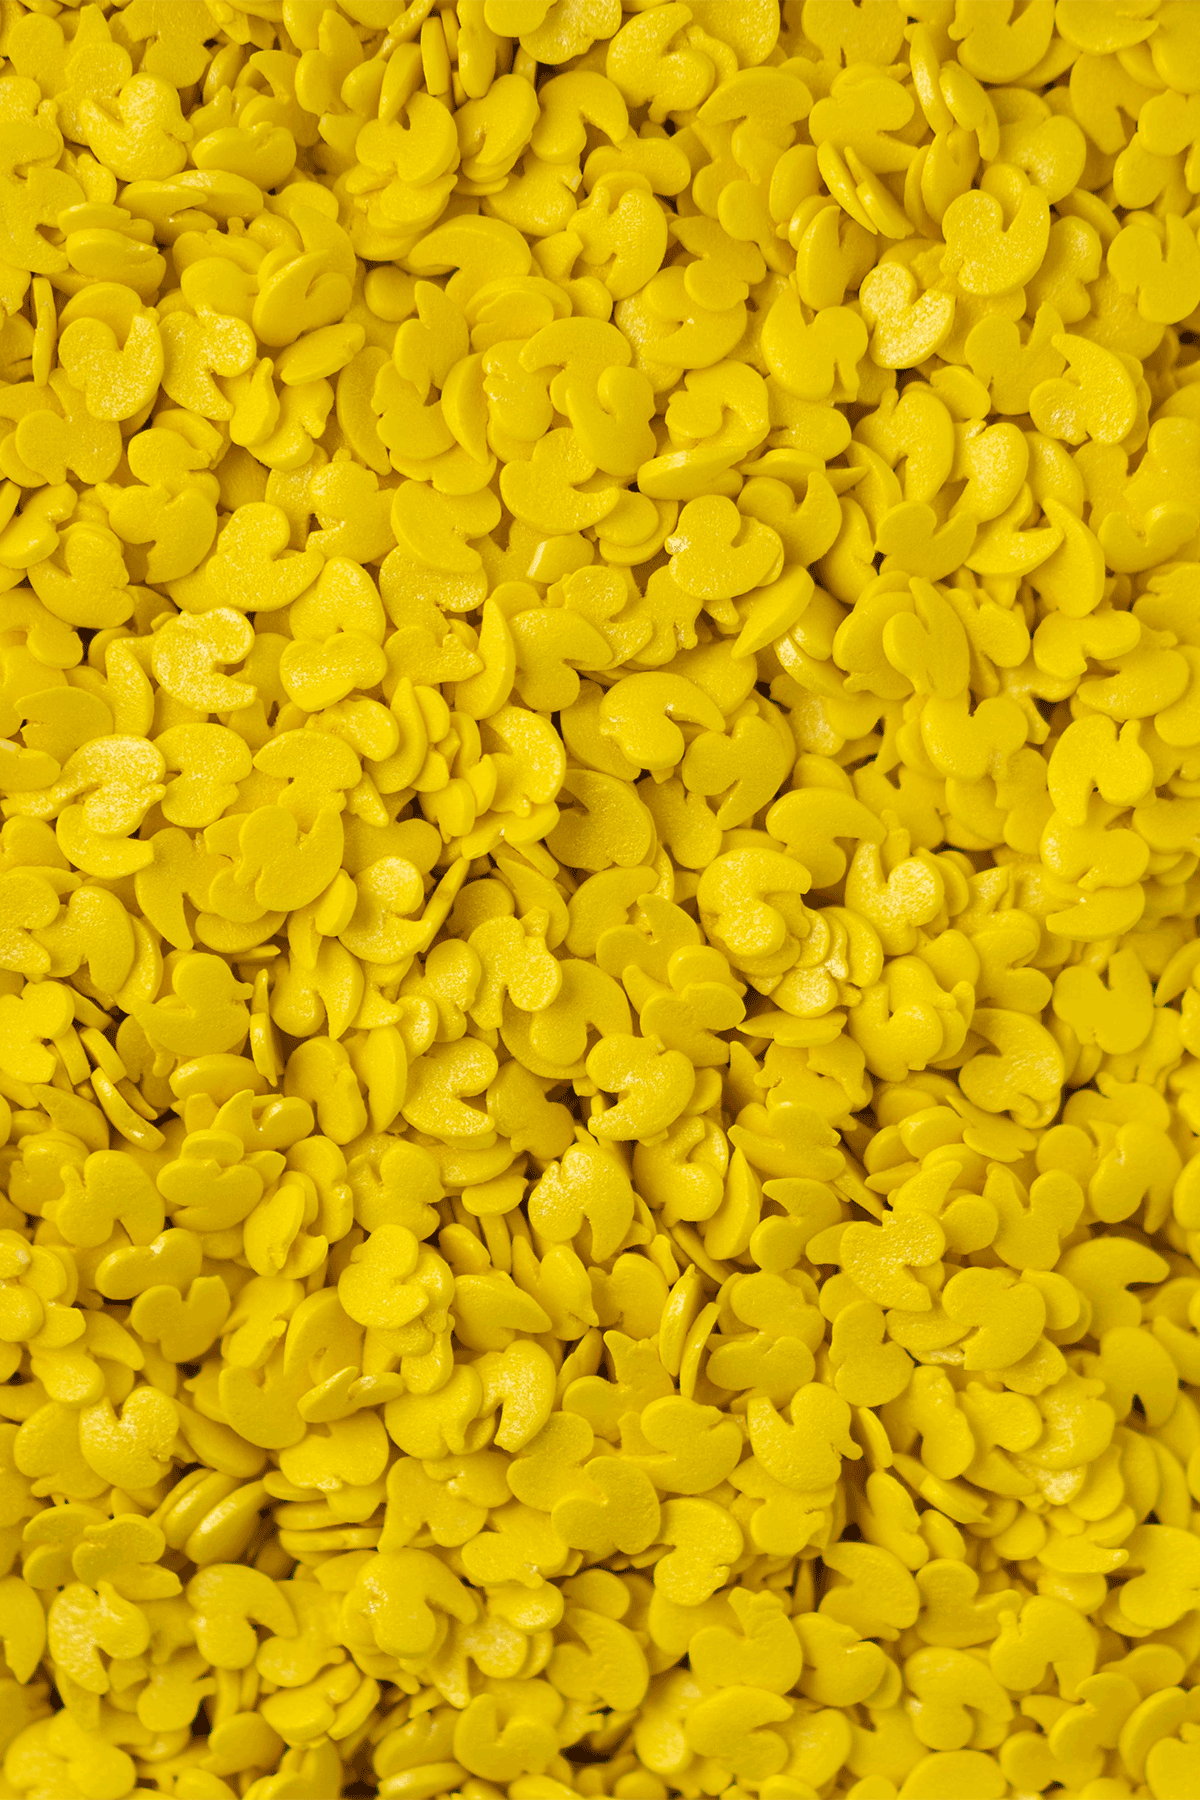 Sprinkle Shapes - Yellow Ducks - 25g Sprinkly